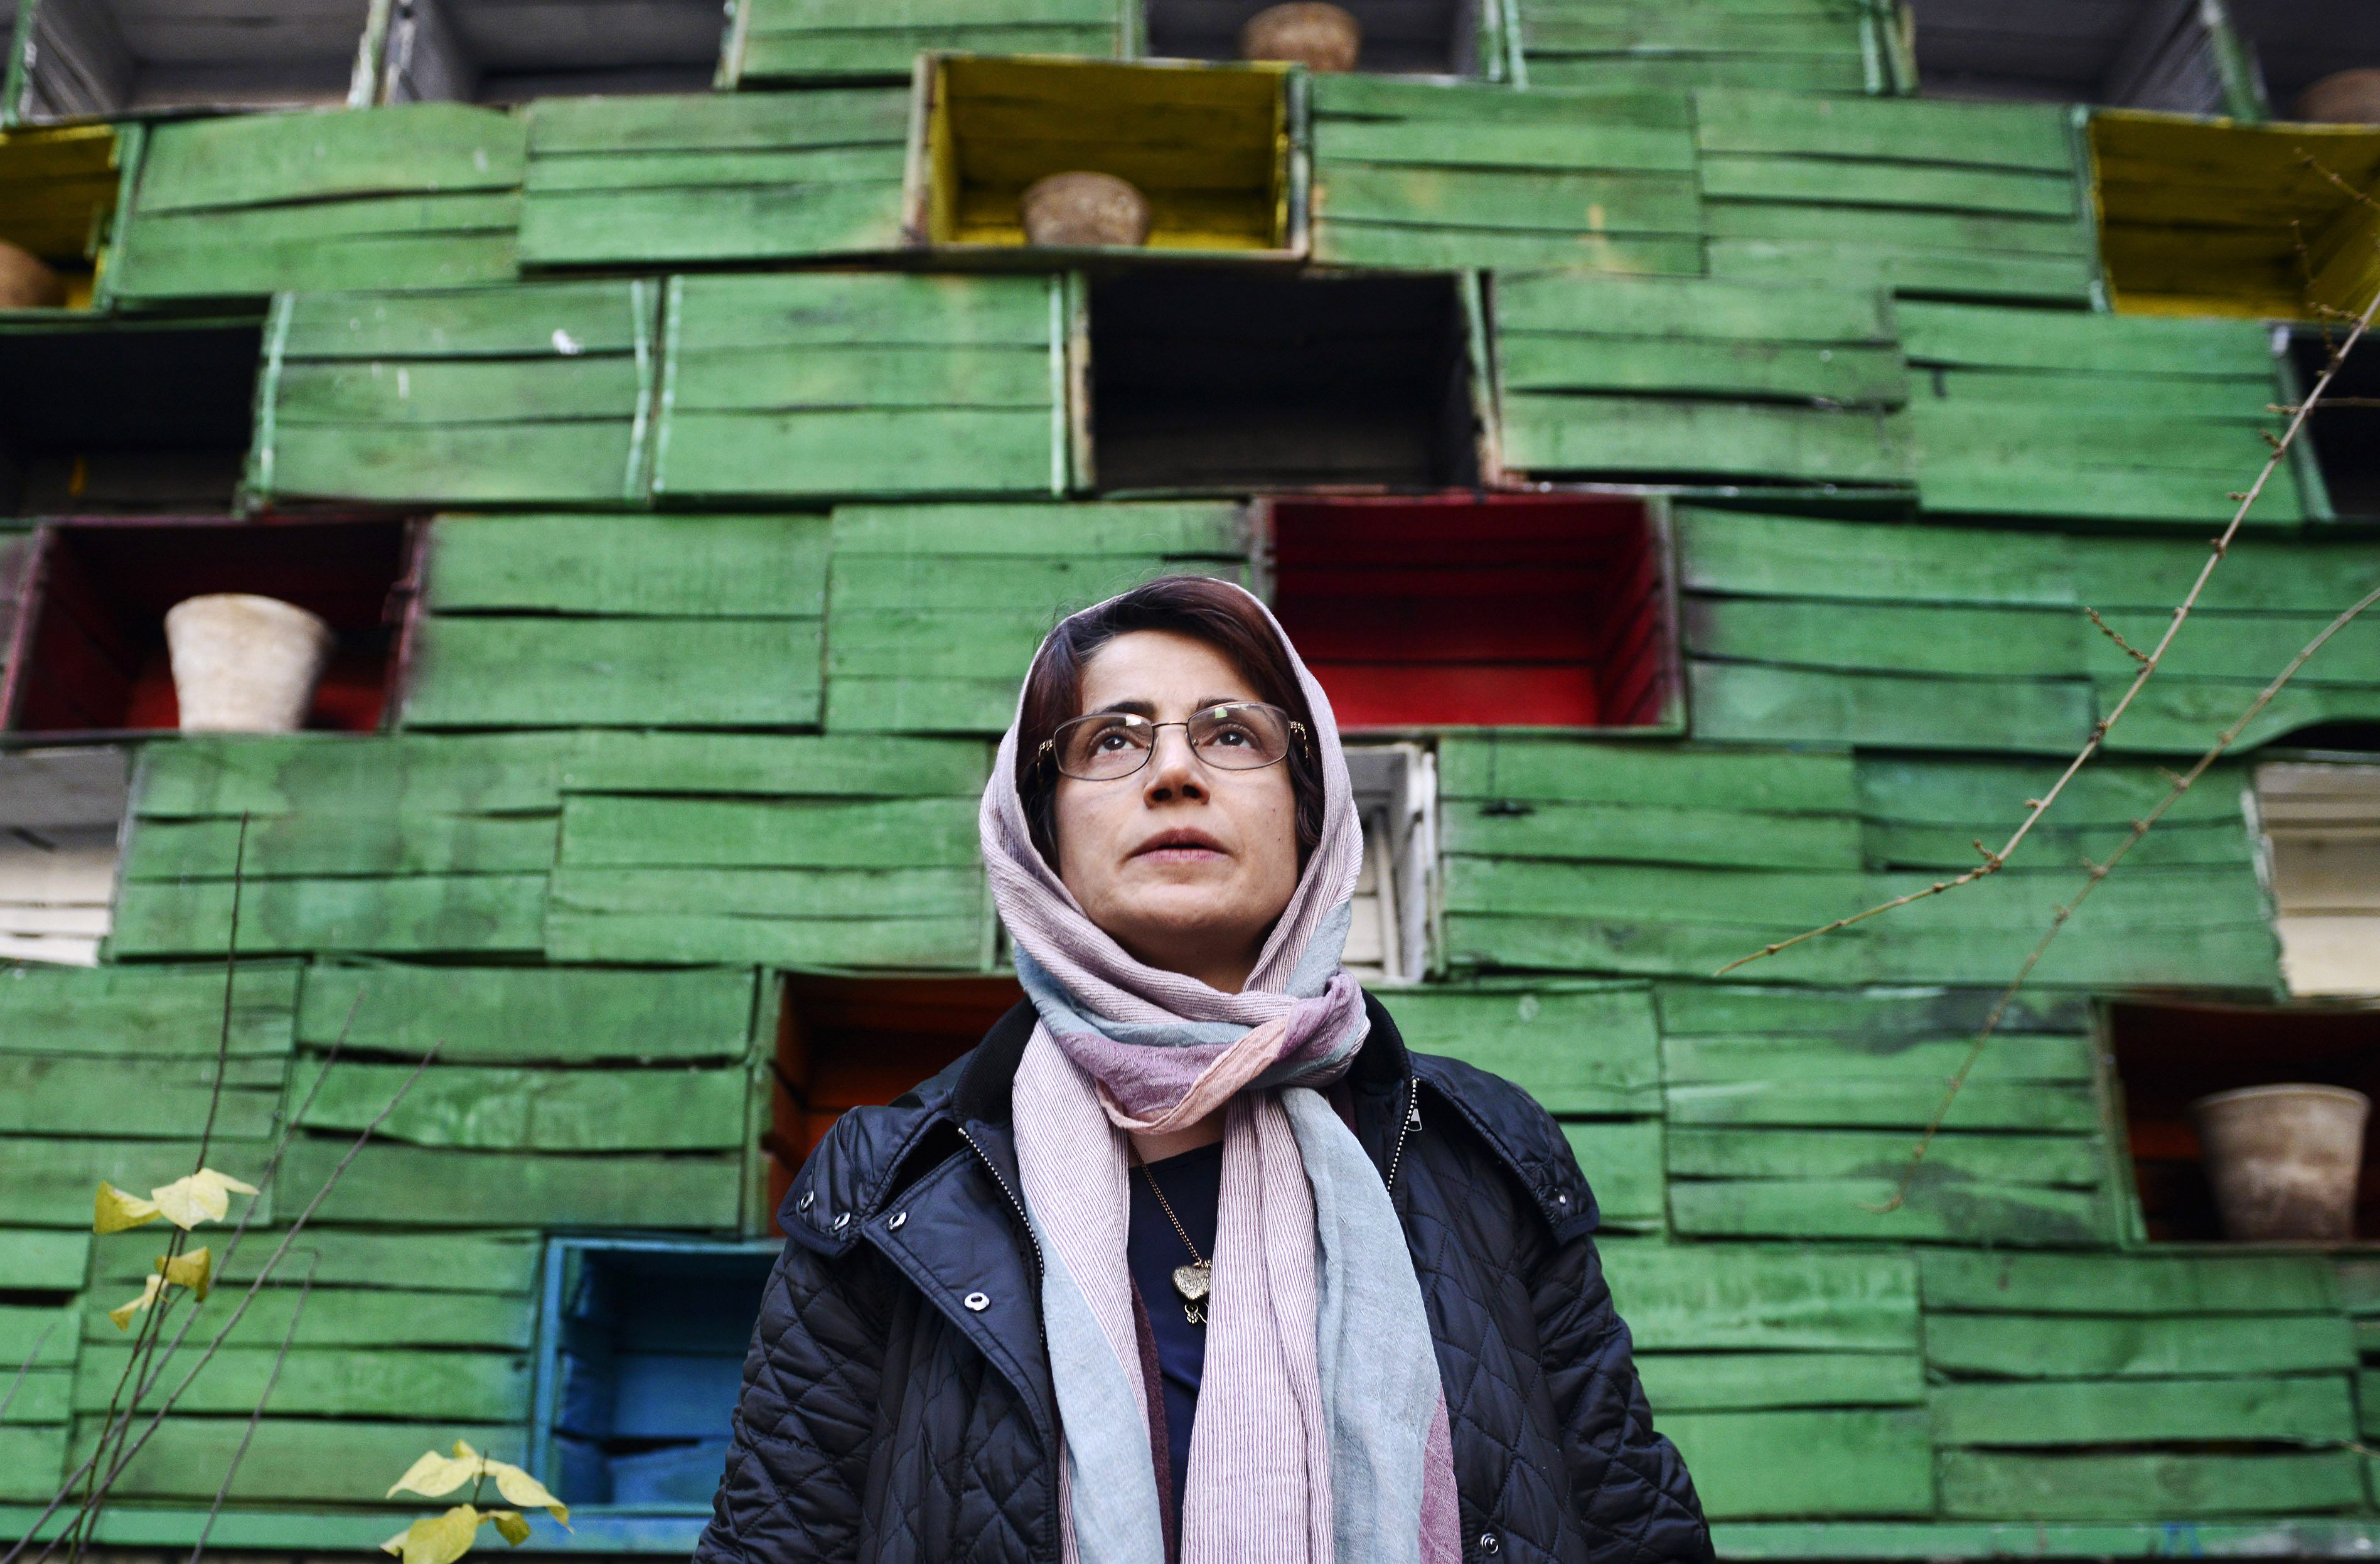 TEHRAN, IRAN - DECEMBER 9, 2014: Human rights lawyer Nasrin Sotoudeh photographed in the garden of her office on December 9, 2014 in Tehran, Iran. Nasrin Sotoudeh is a human rights lawyer who has represented imprisoned Iranian opposition activists and politicians following the disputed June 2009 Iranian presidential elections as well as prisoners sentenced to death for crimes committed when they were minors. Sotoudeh was arrested in September 2010 on charges of spreading propaganda and conspiring to harm state security and was imprisoned in solitary confinement in Evin Prison. In January 2011, Iranian authorities sentenced Sotoudeh to 11 years in prison, in addition to barring her from practicing law and from leaving the country for 20 years. An appeals court later reduced Sotoudeh's prison sentence to six years, and her ban from working as a lawyer to ten years. On 26 October 2012, Sotoudeh was announced as a co-winner of the Sakharov Prize of the European Parliament. She shared the award with Iranian film director Jafar Panahi. Sotoudeh was released on 18 September 2013 along with ten other political prisoners, including opposition leader Mohsen Aminzadeh, days before an address by Iranian President Hassan Rouhani to the United Nations. No explanation was given for her early release. (Photo by Kaveh Kazemi/Getty Images)